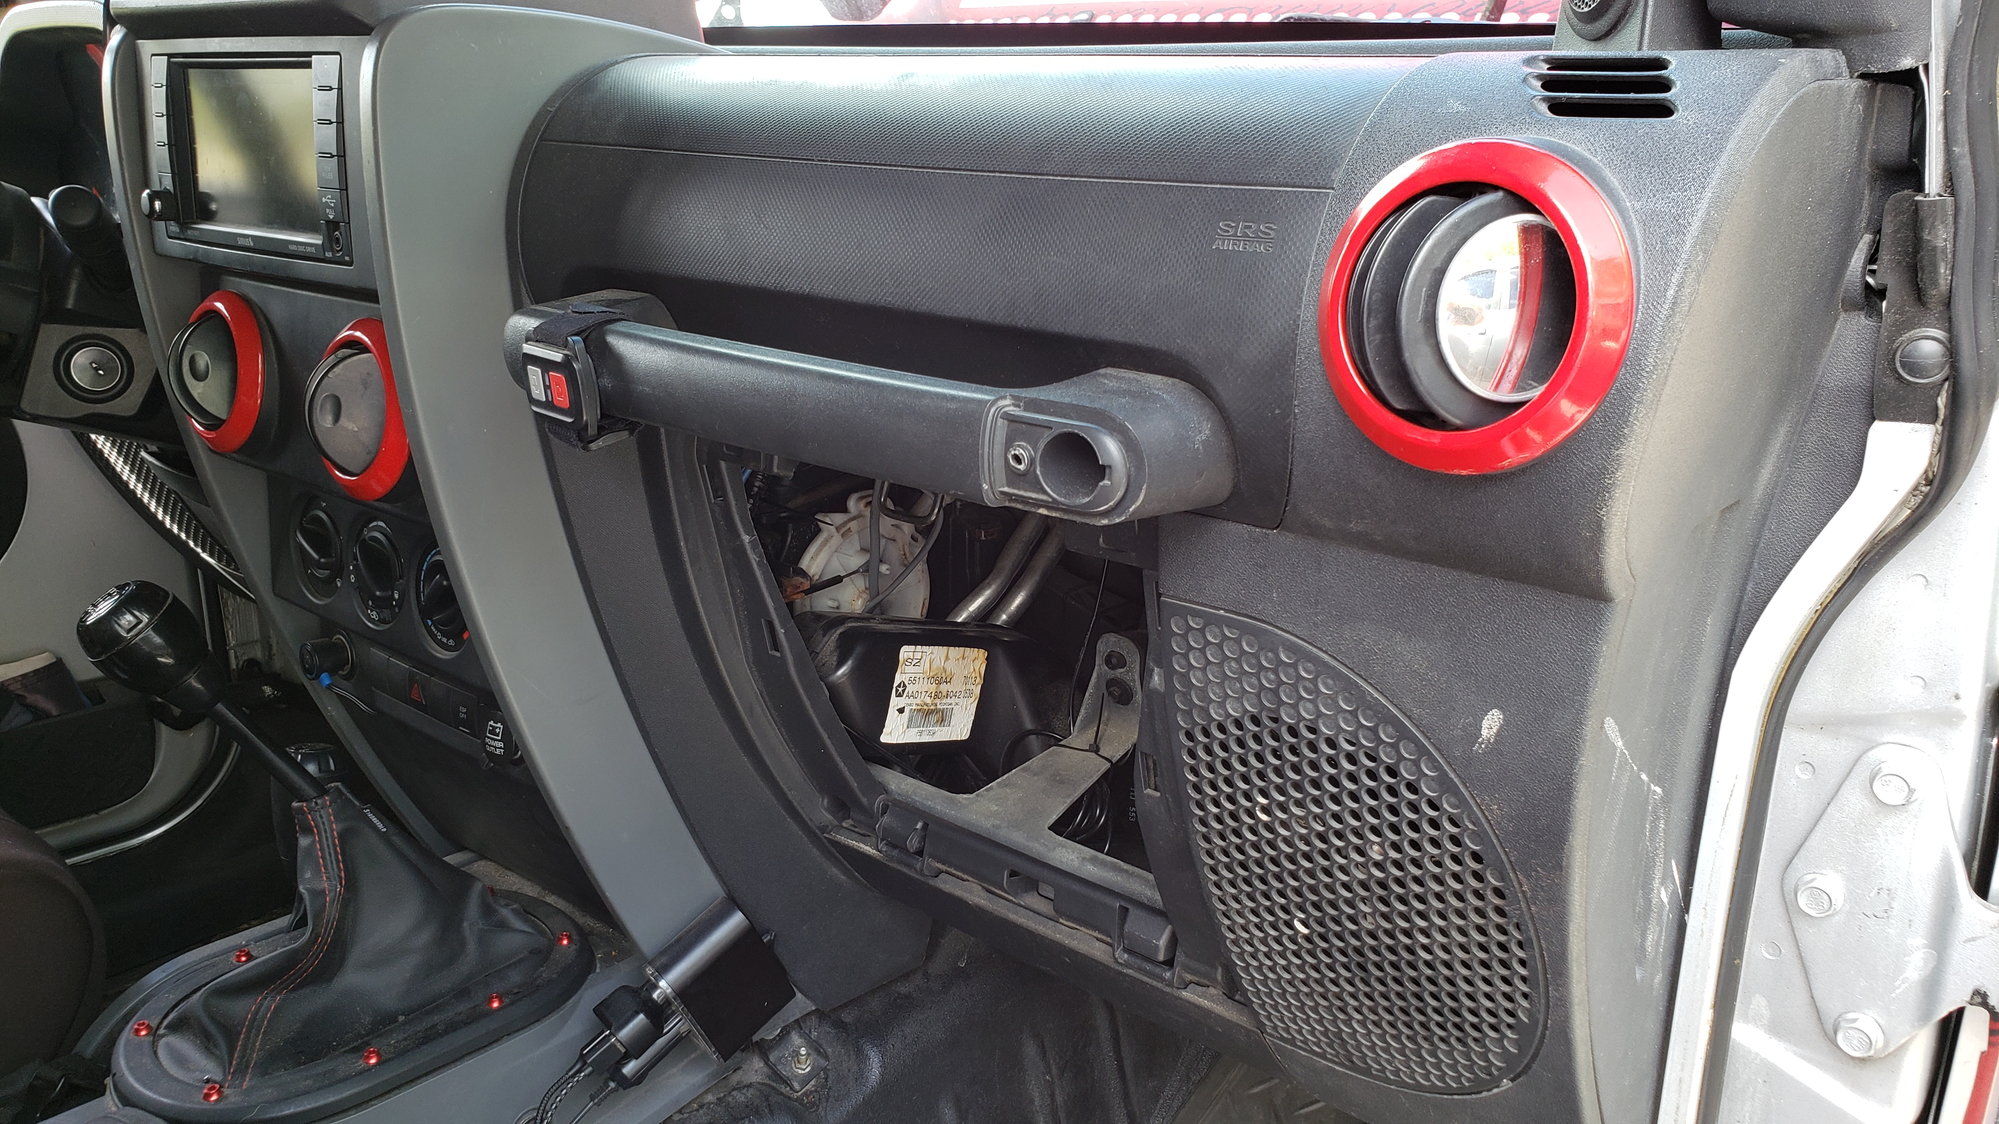 2007-2018 JK Heater Core Replacement  - The top destination  for Jeep JK and JL Wrangler news, rumors, and discussion